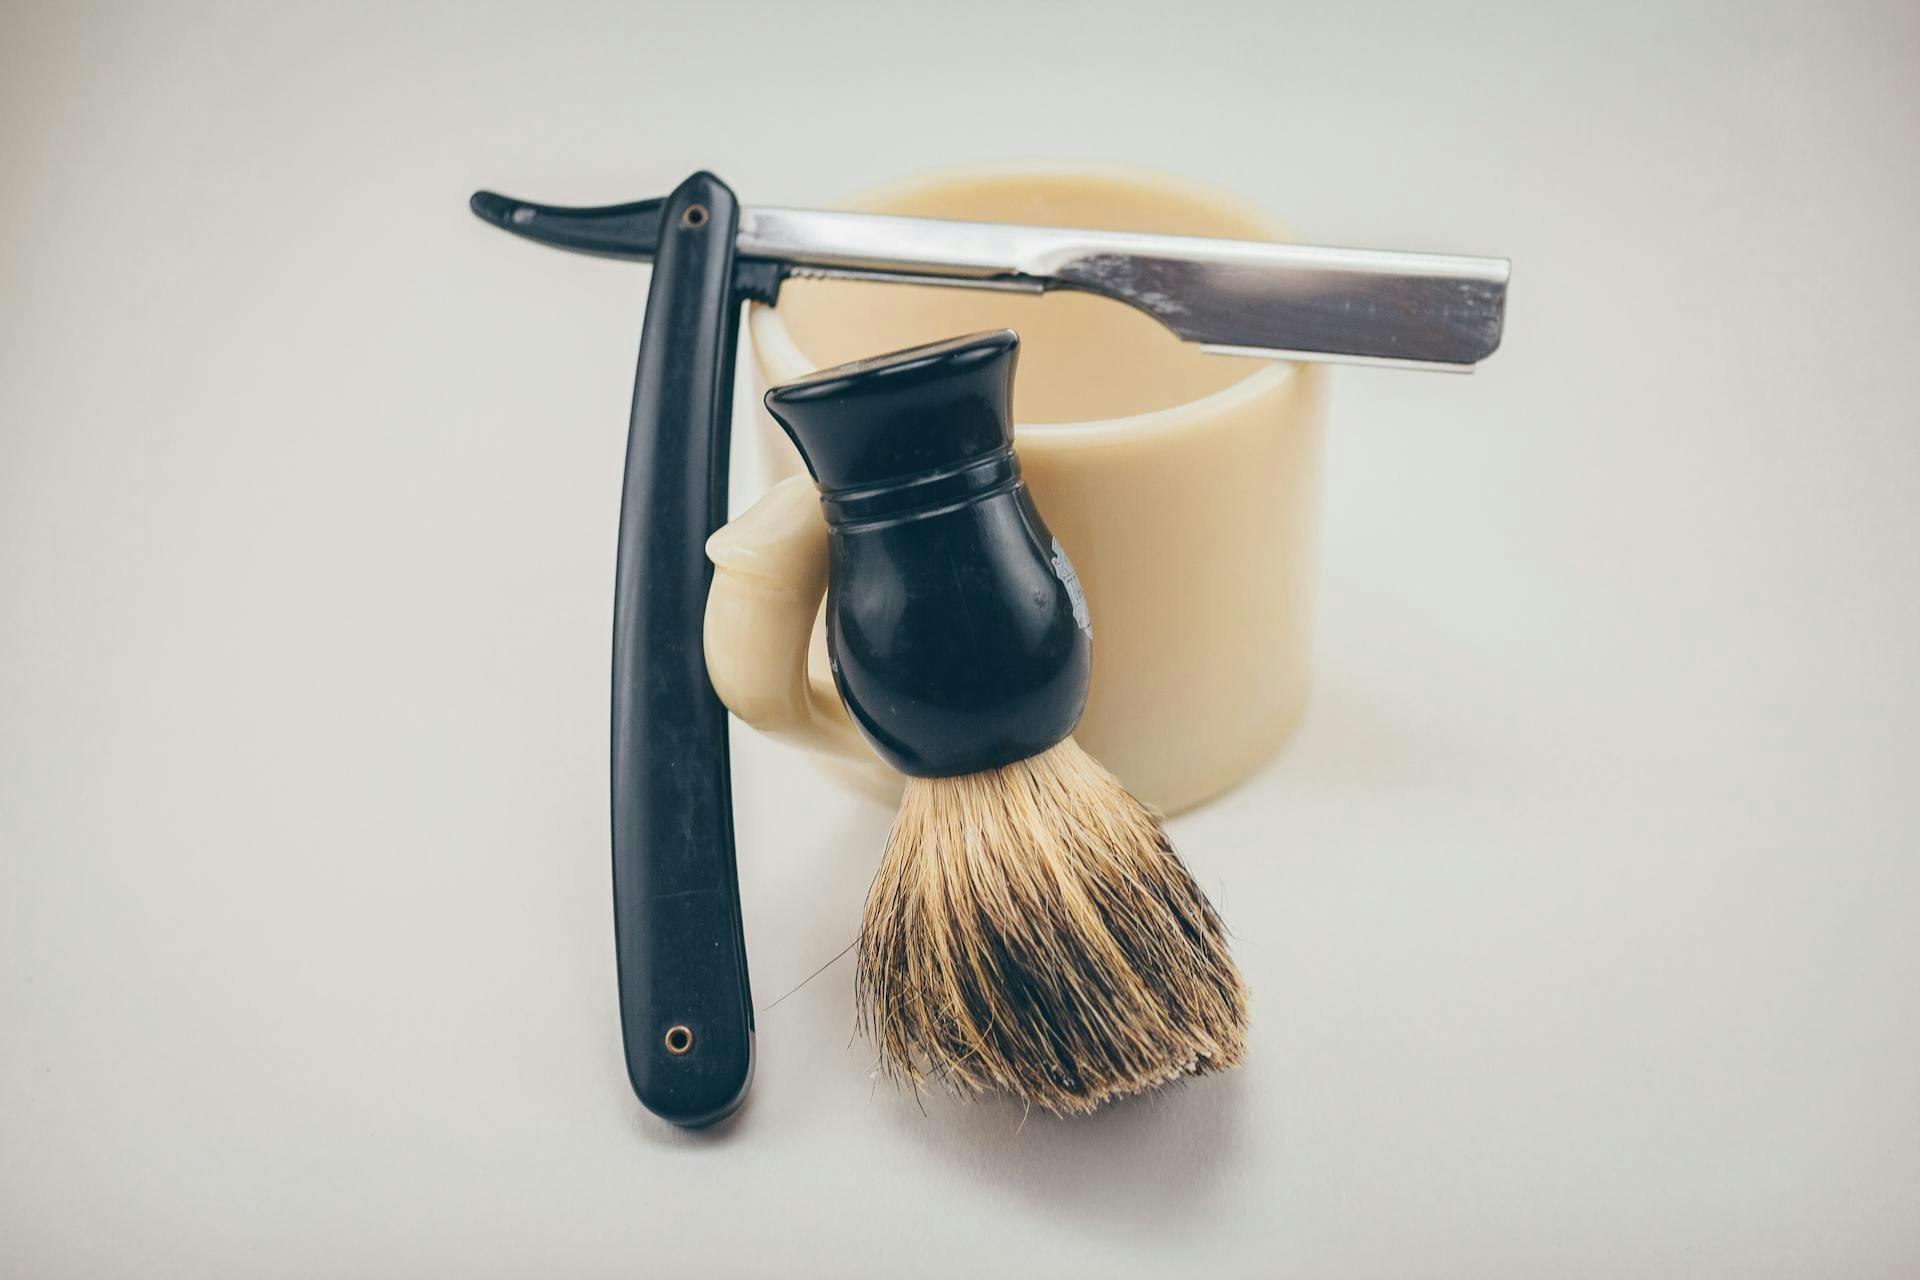 Keeping Up with Current Barbering Trends in an Ever-Changing Industry